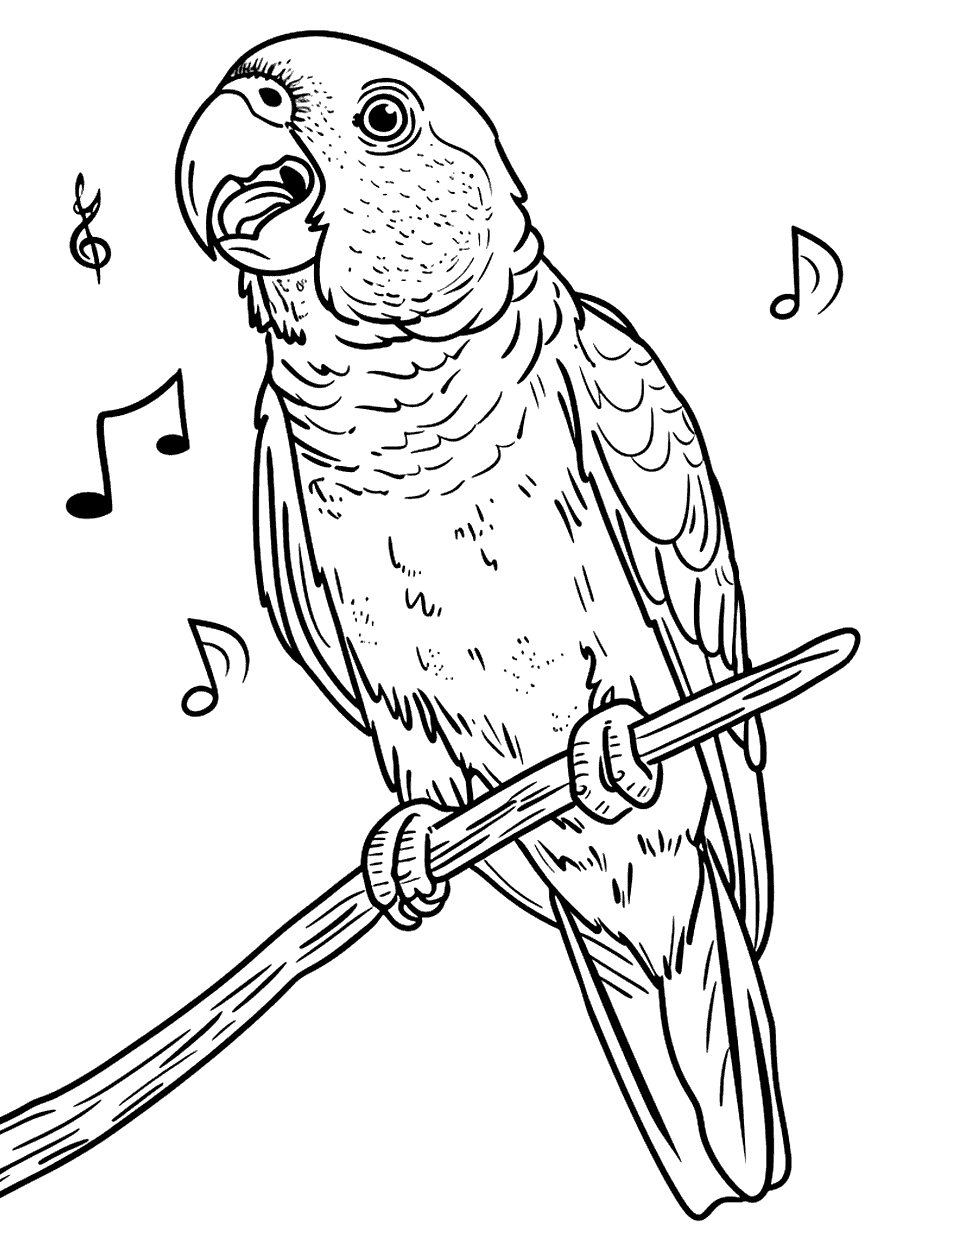 Chatty African Grey Parrot Coloring Page - An African grey talking, with a few musical notes floating around to suggest its voice.